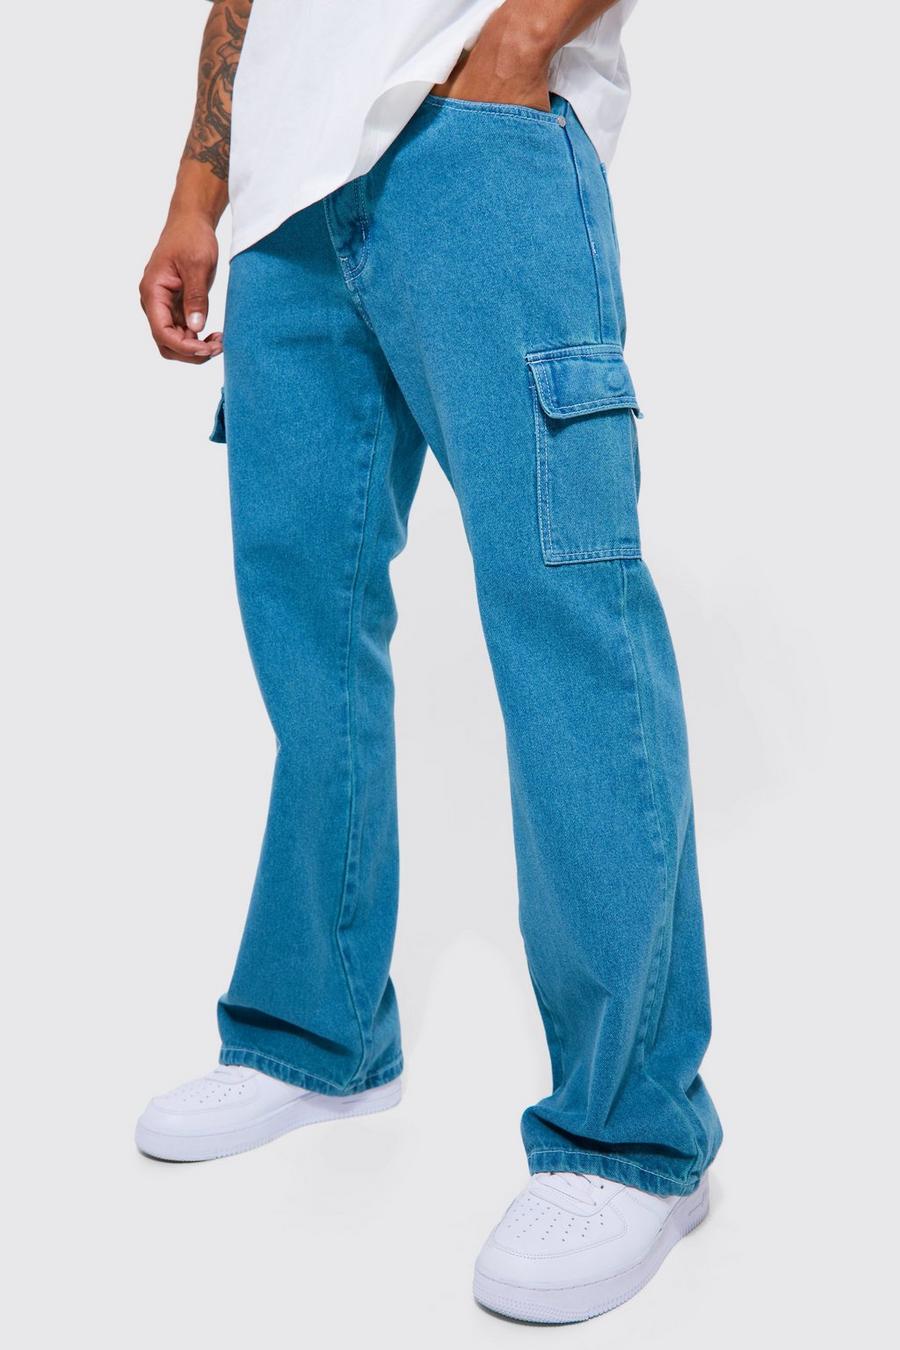 boohooMAN Mens Blue Relaxed Fit Carpenter Jeans, Blue Male 30R